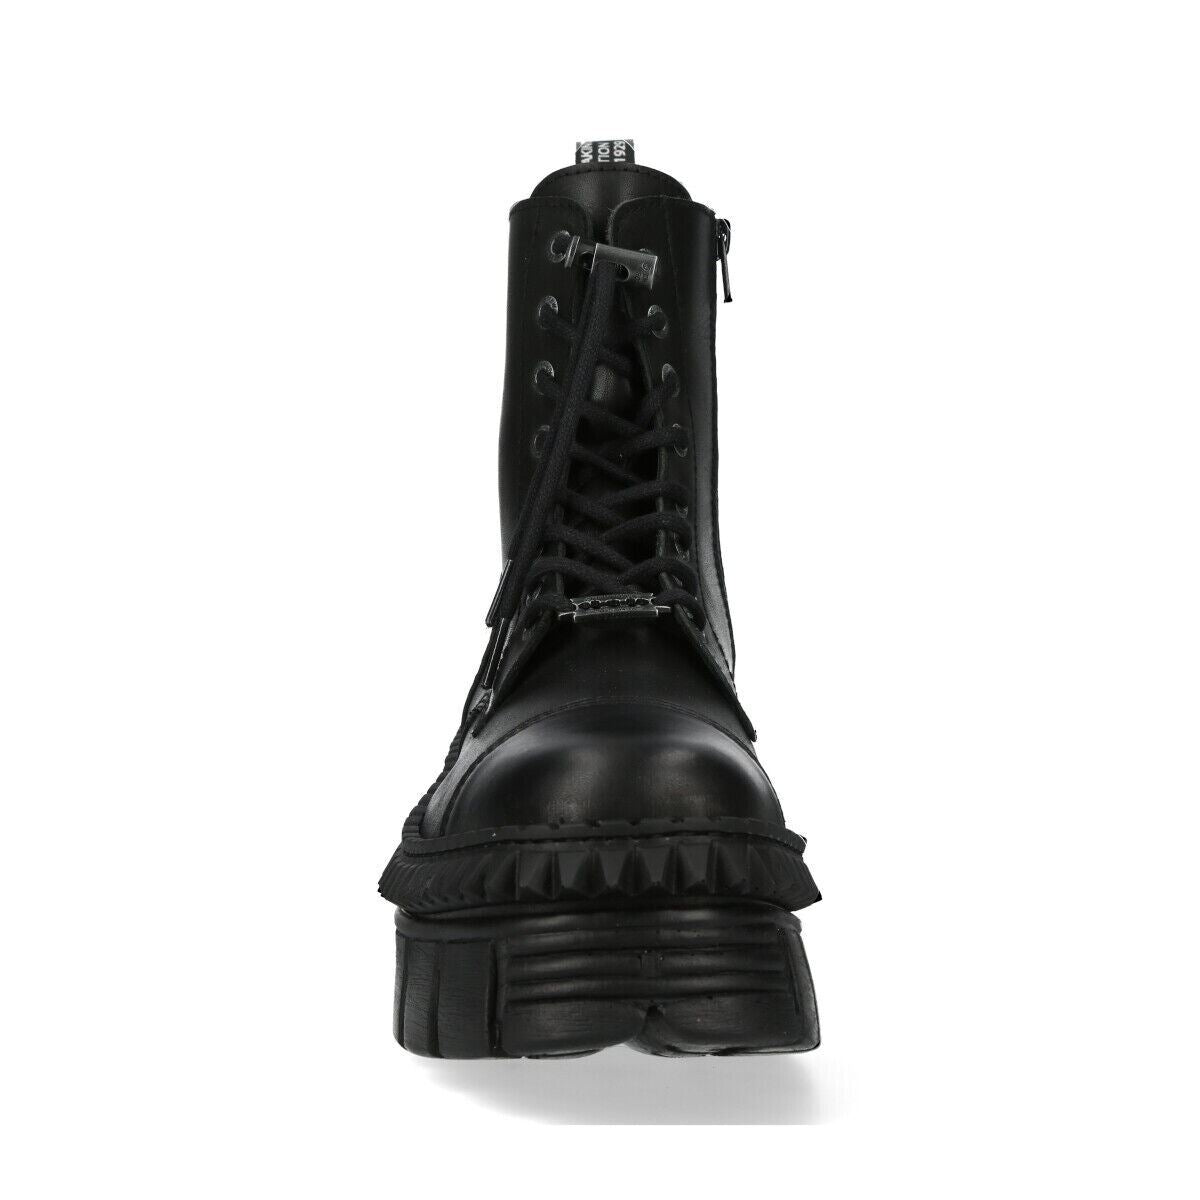 New Rock Black Leather Boots-WALL083CCT-S6 - Upperclass Fashions 